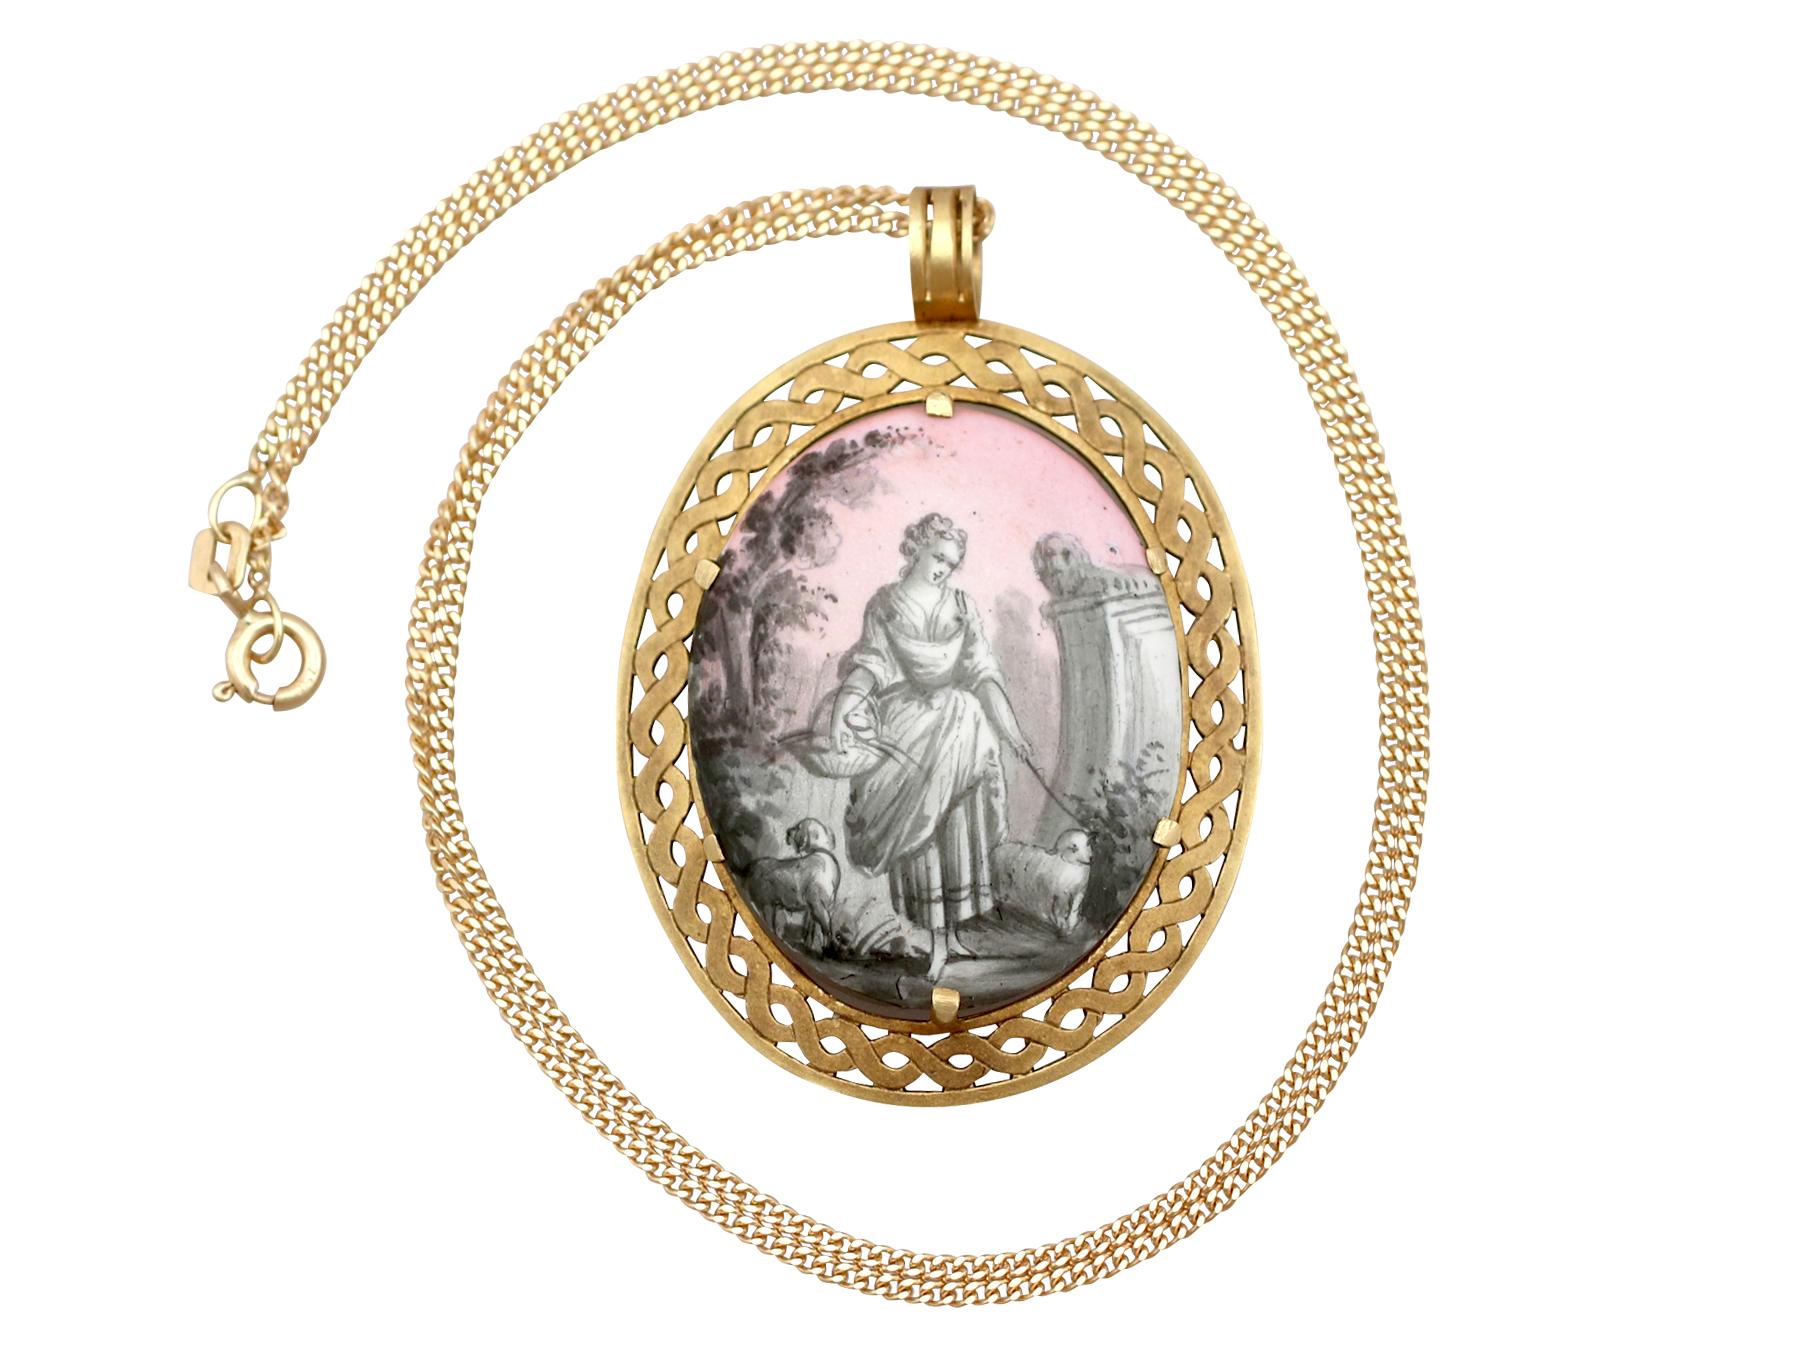 An exceptional and impressive antique French hand painted enamel and mother of pearl pendant in 18 karat yellow gold; part of our diverse antique jewelry and estate jewelry collections.

This exceptional, fine and impressive antique pendant has been